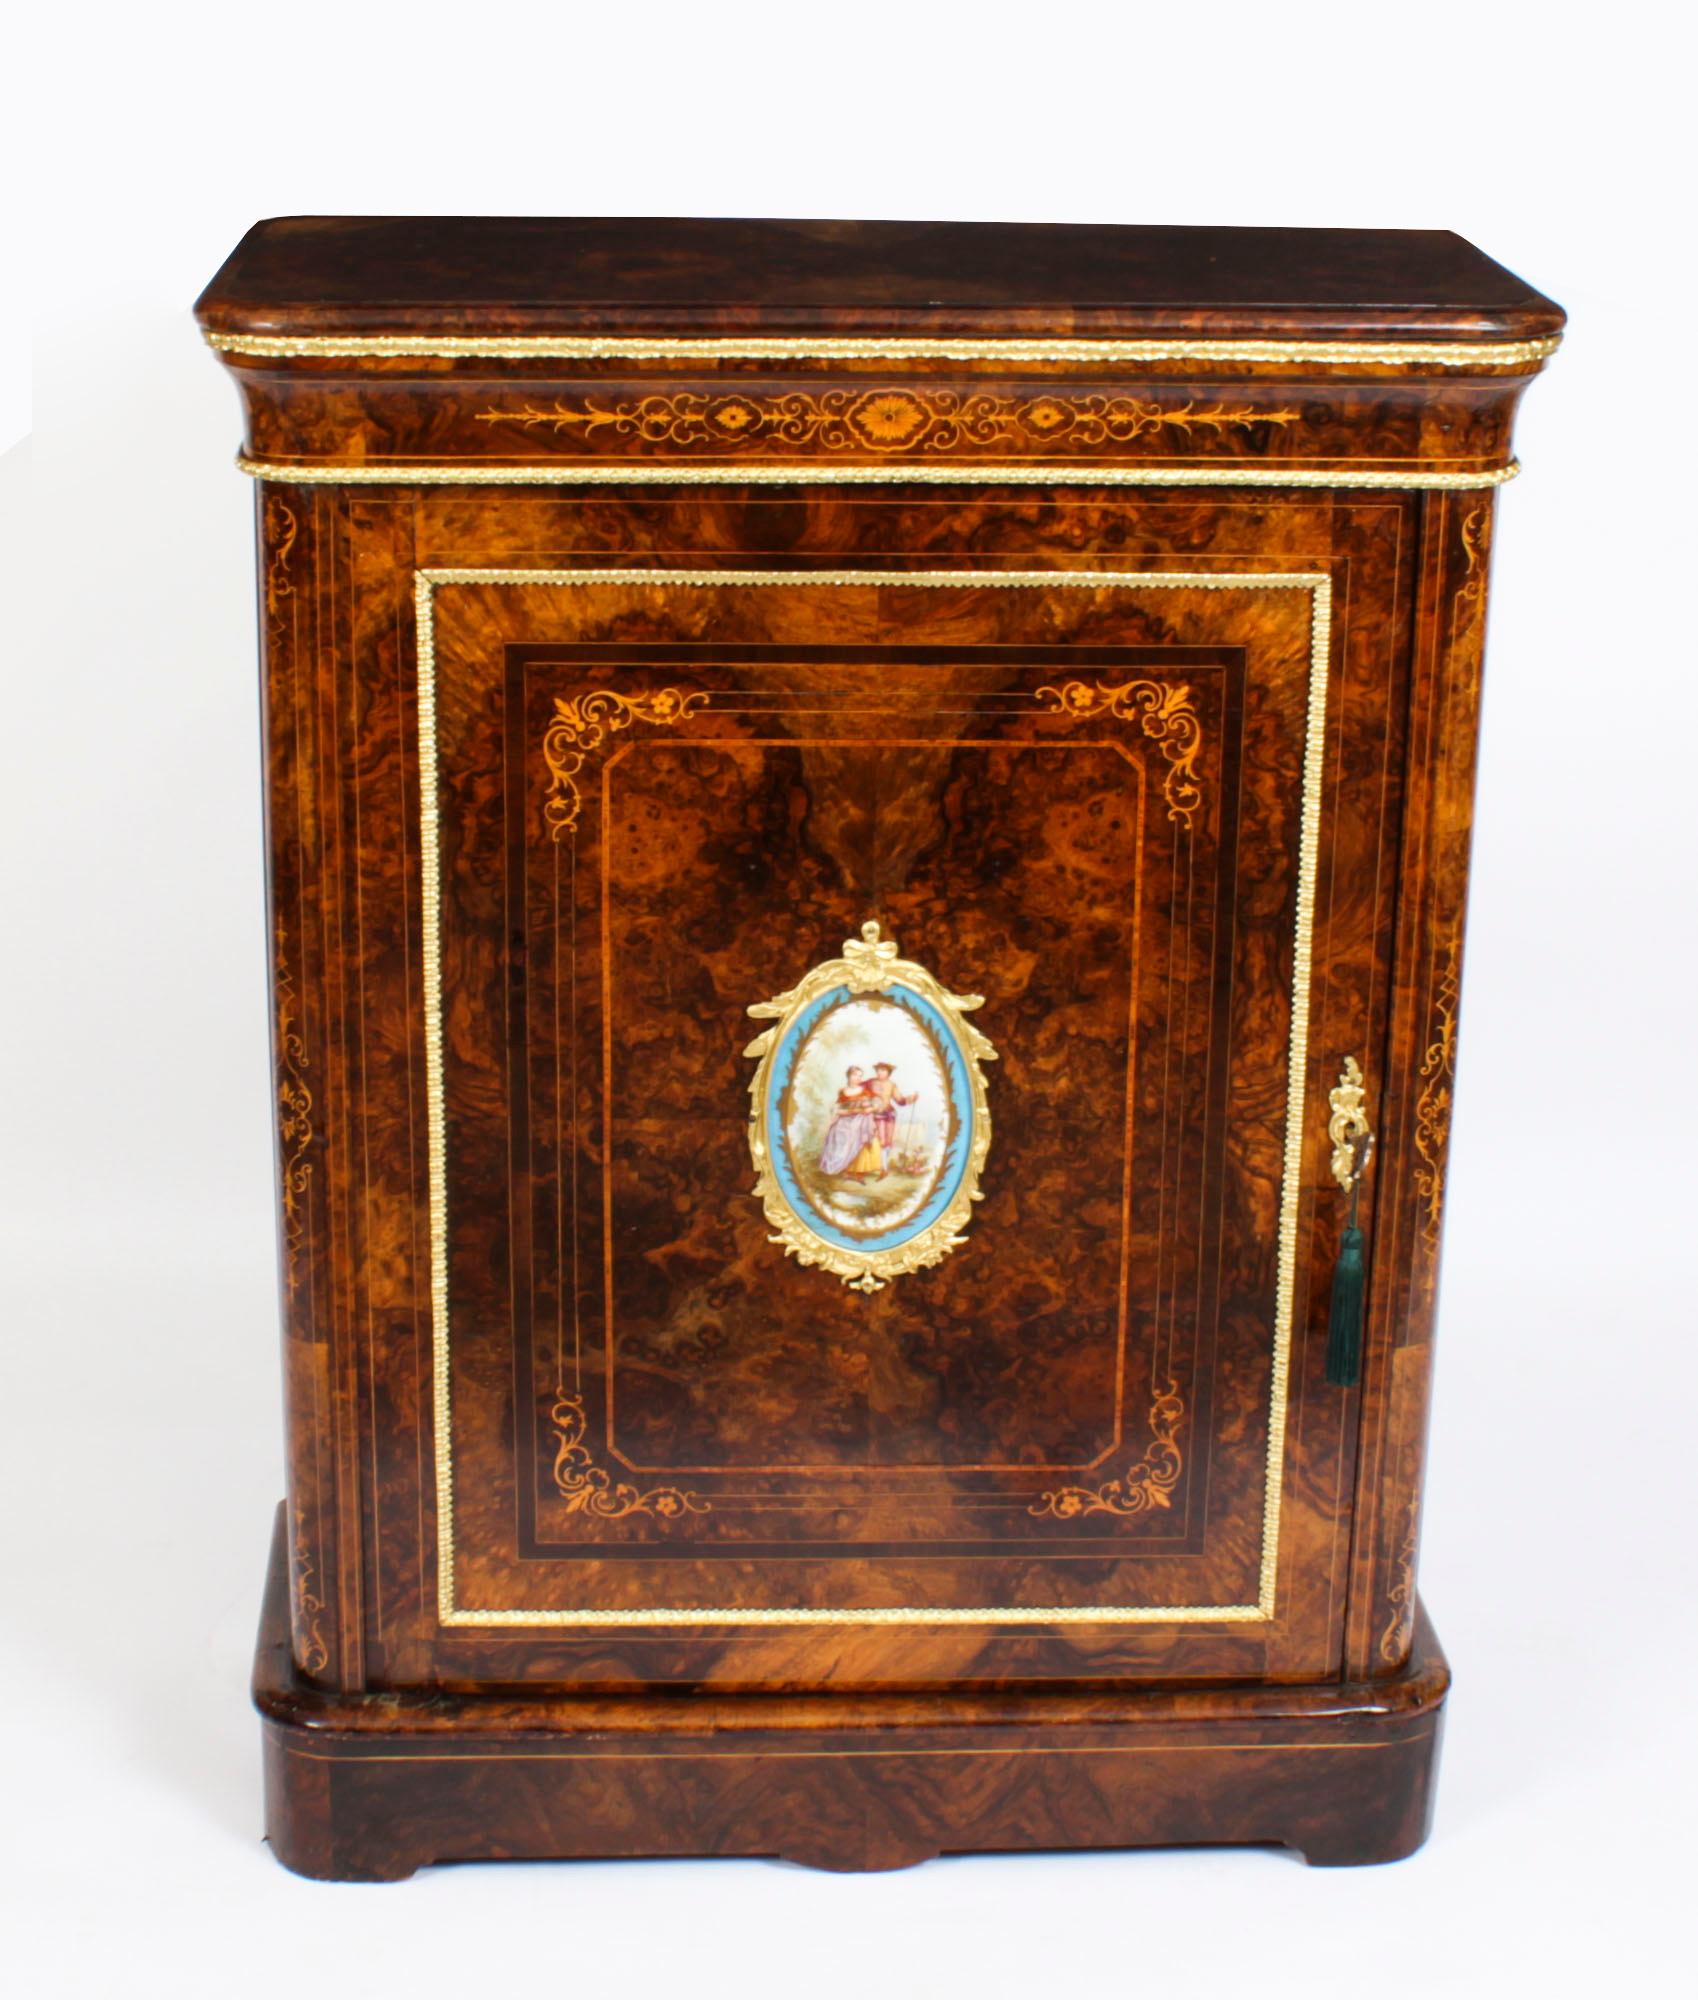 This stunning antique Victorian cabinet is a true rarity. It has been accomplished in burr walnut, an exotic and valuable veneer, has beautiful inlaid decoration and ormolu mounts, and is Circa 1860 in date.
 
Adding to its truly unique character